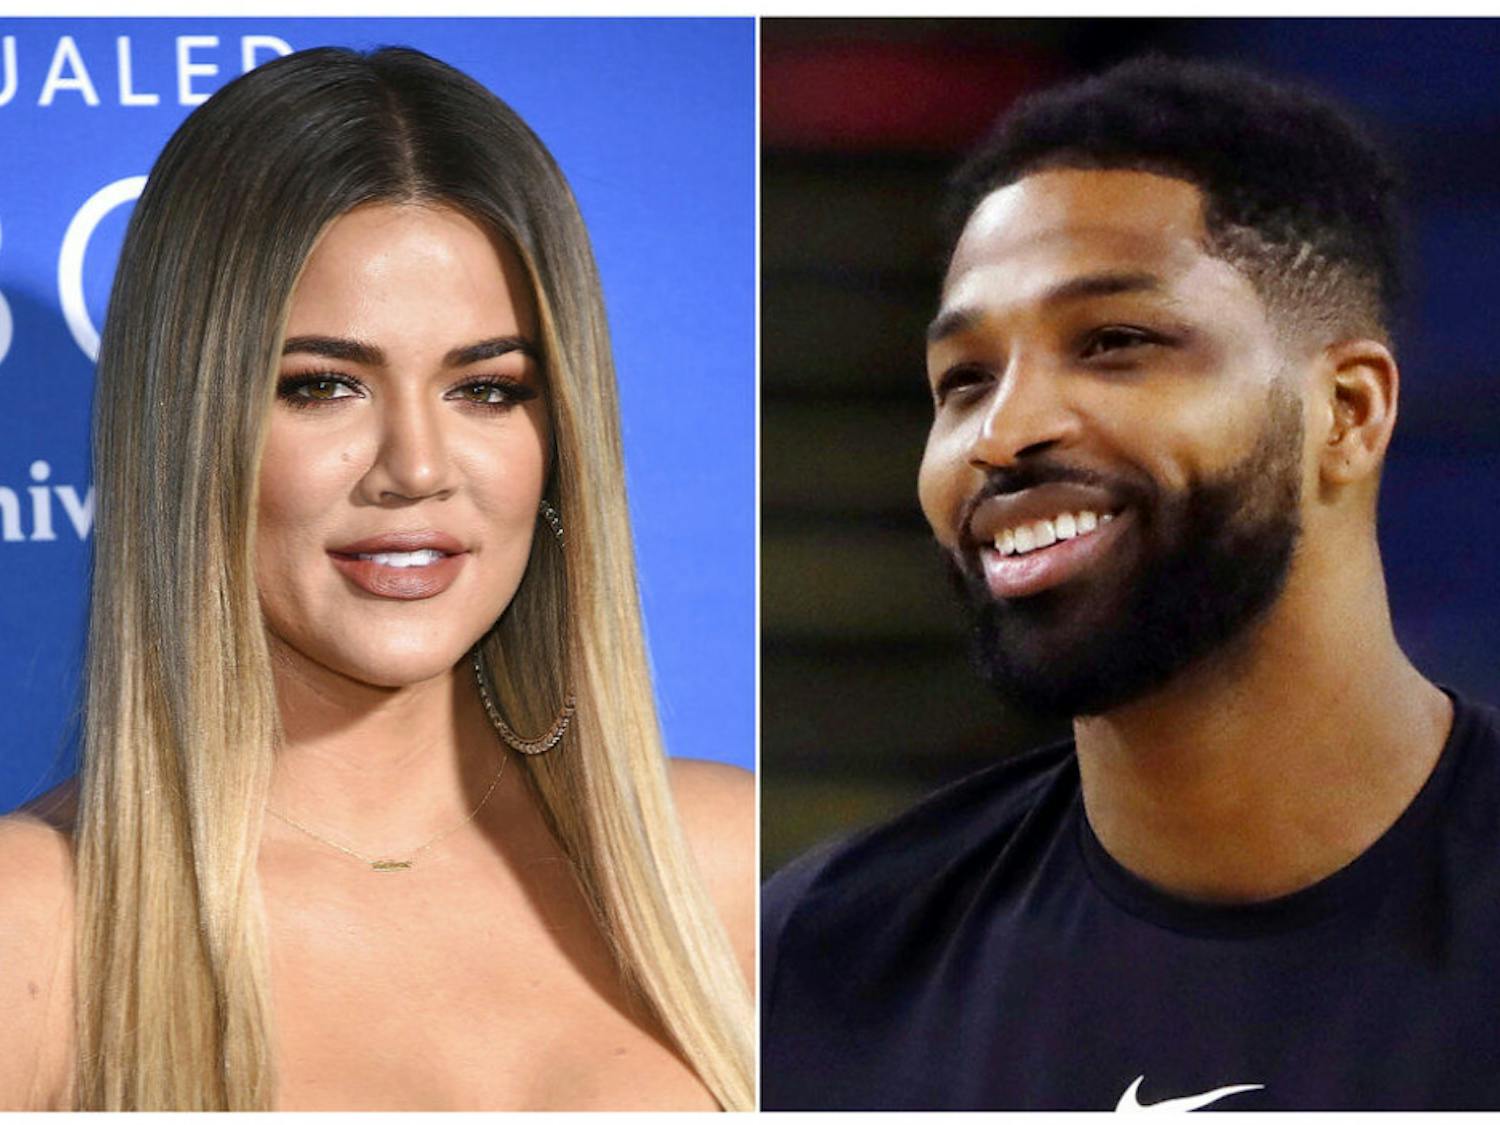 This combination photo shows TV personality Khloe Kardashian at the NBCUniversal Network 2017 Upfront in New York on May 15, 2017, left, and Cleveland Cavaliers' Tristan Thompson during an NBA basketball practice in Oakland, Calif., on May 30, 2018. Kardashian and Thompson have a nearly one-year-old daughter named True. (AP Photo)